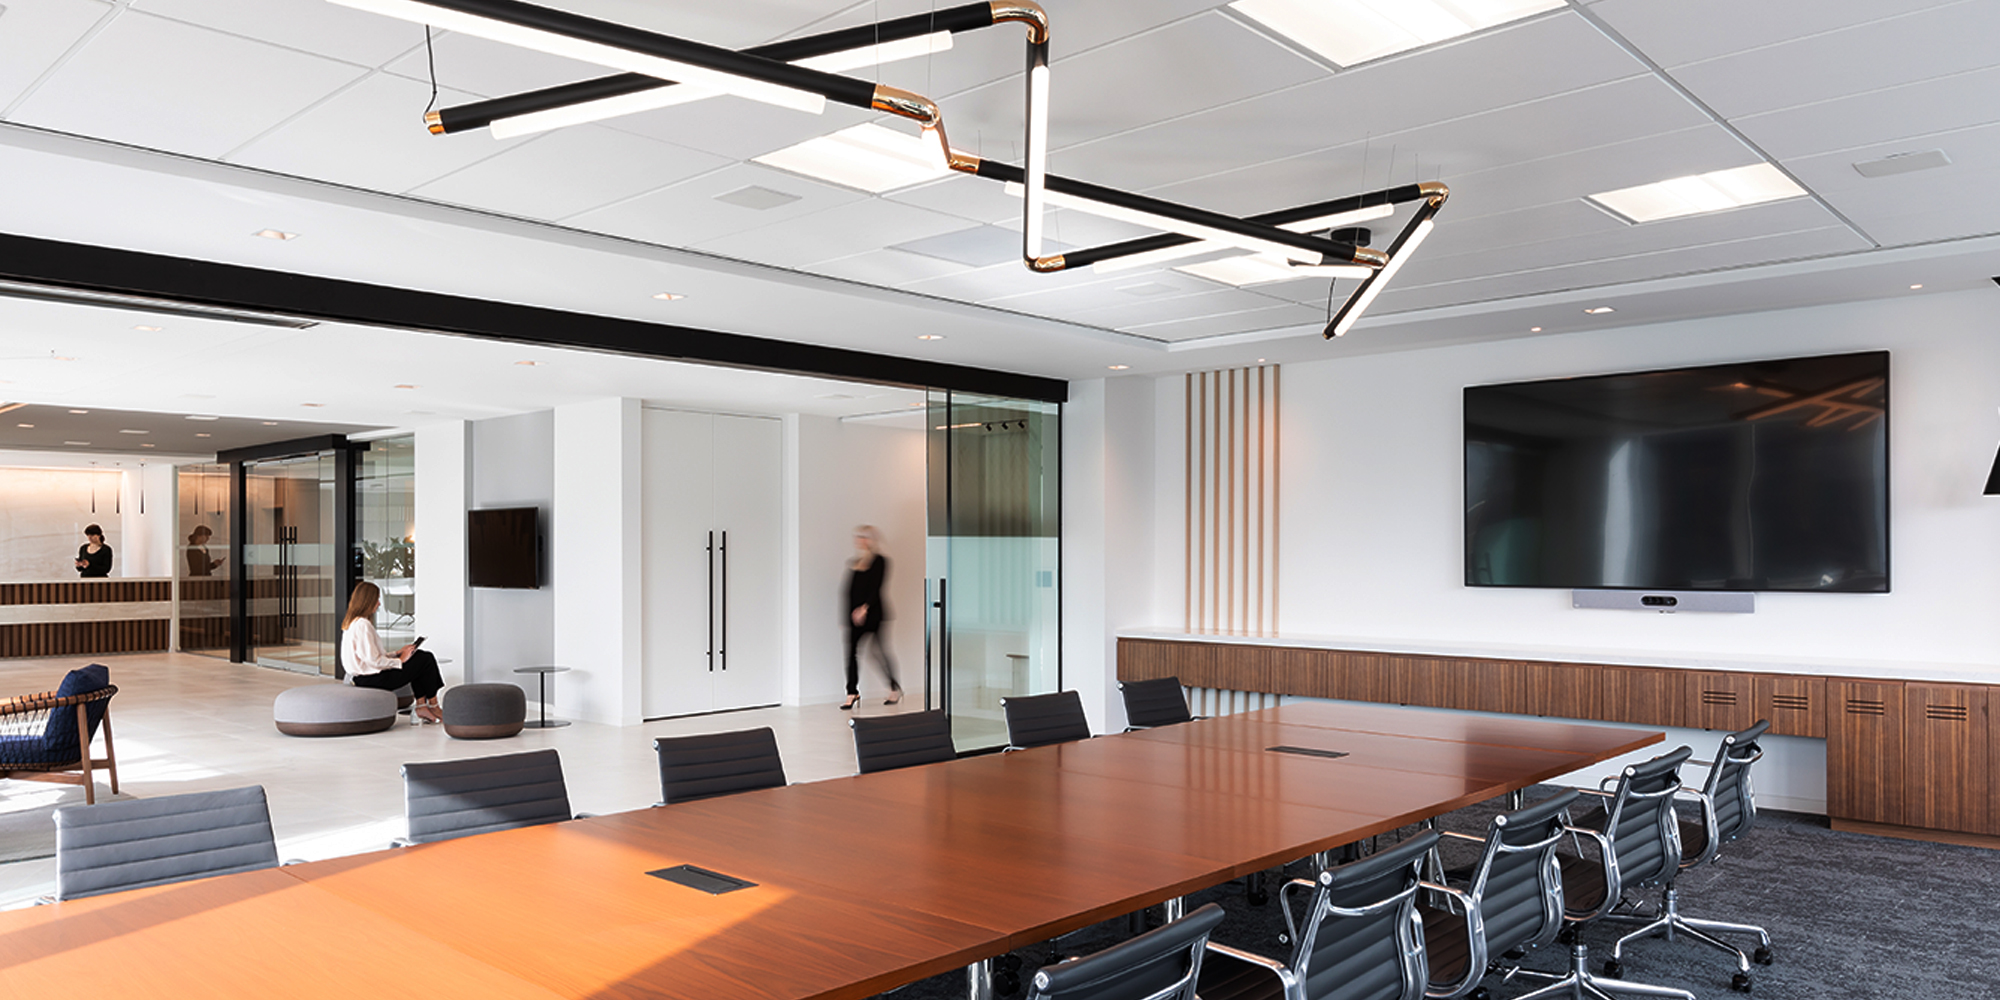 Meeting room with long conference table surrounded by chairs